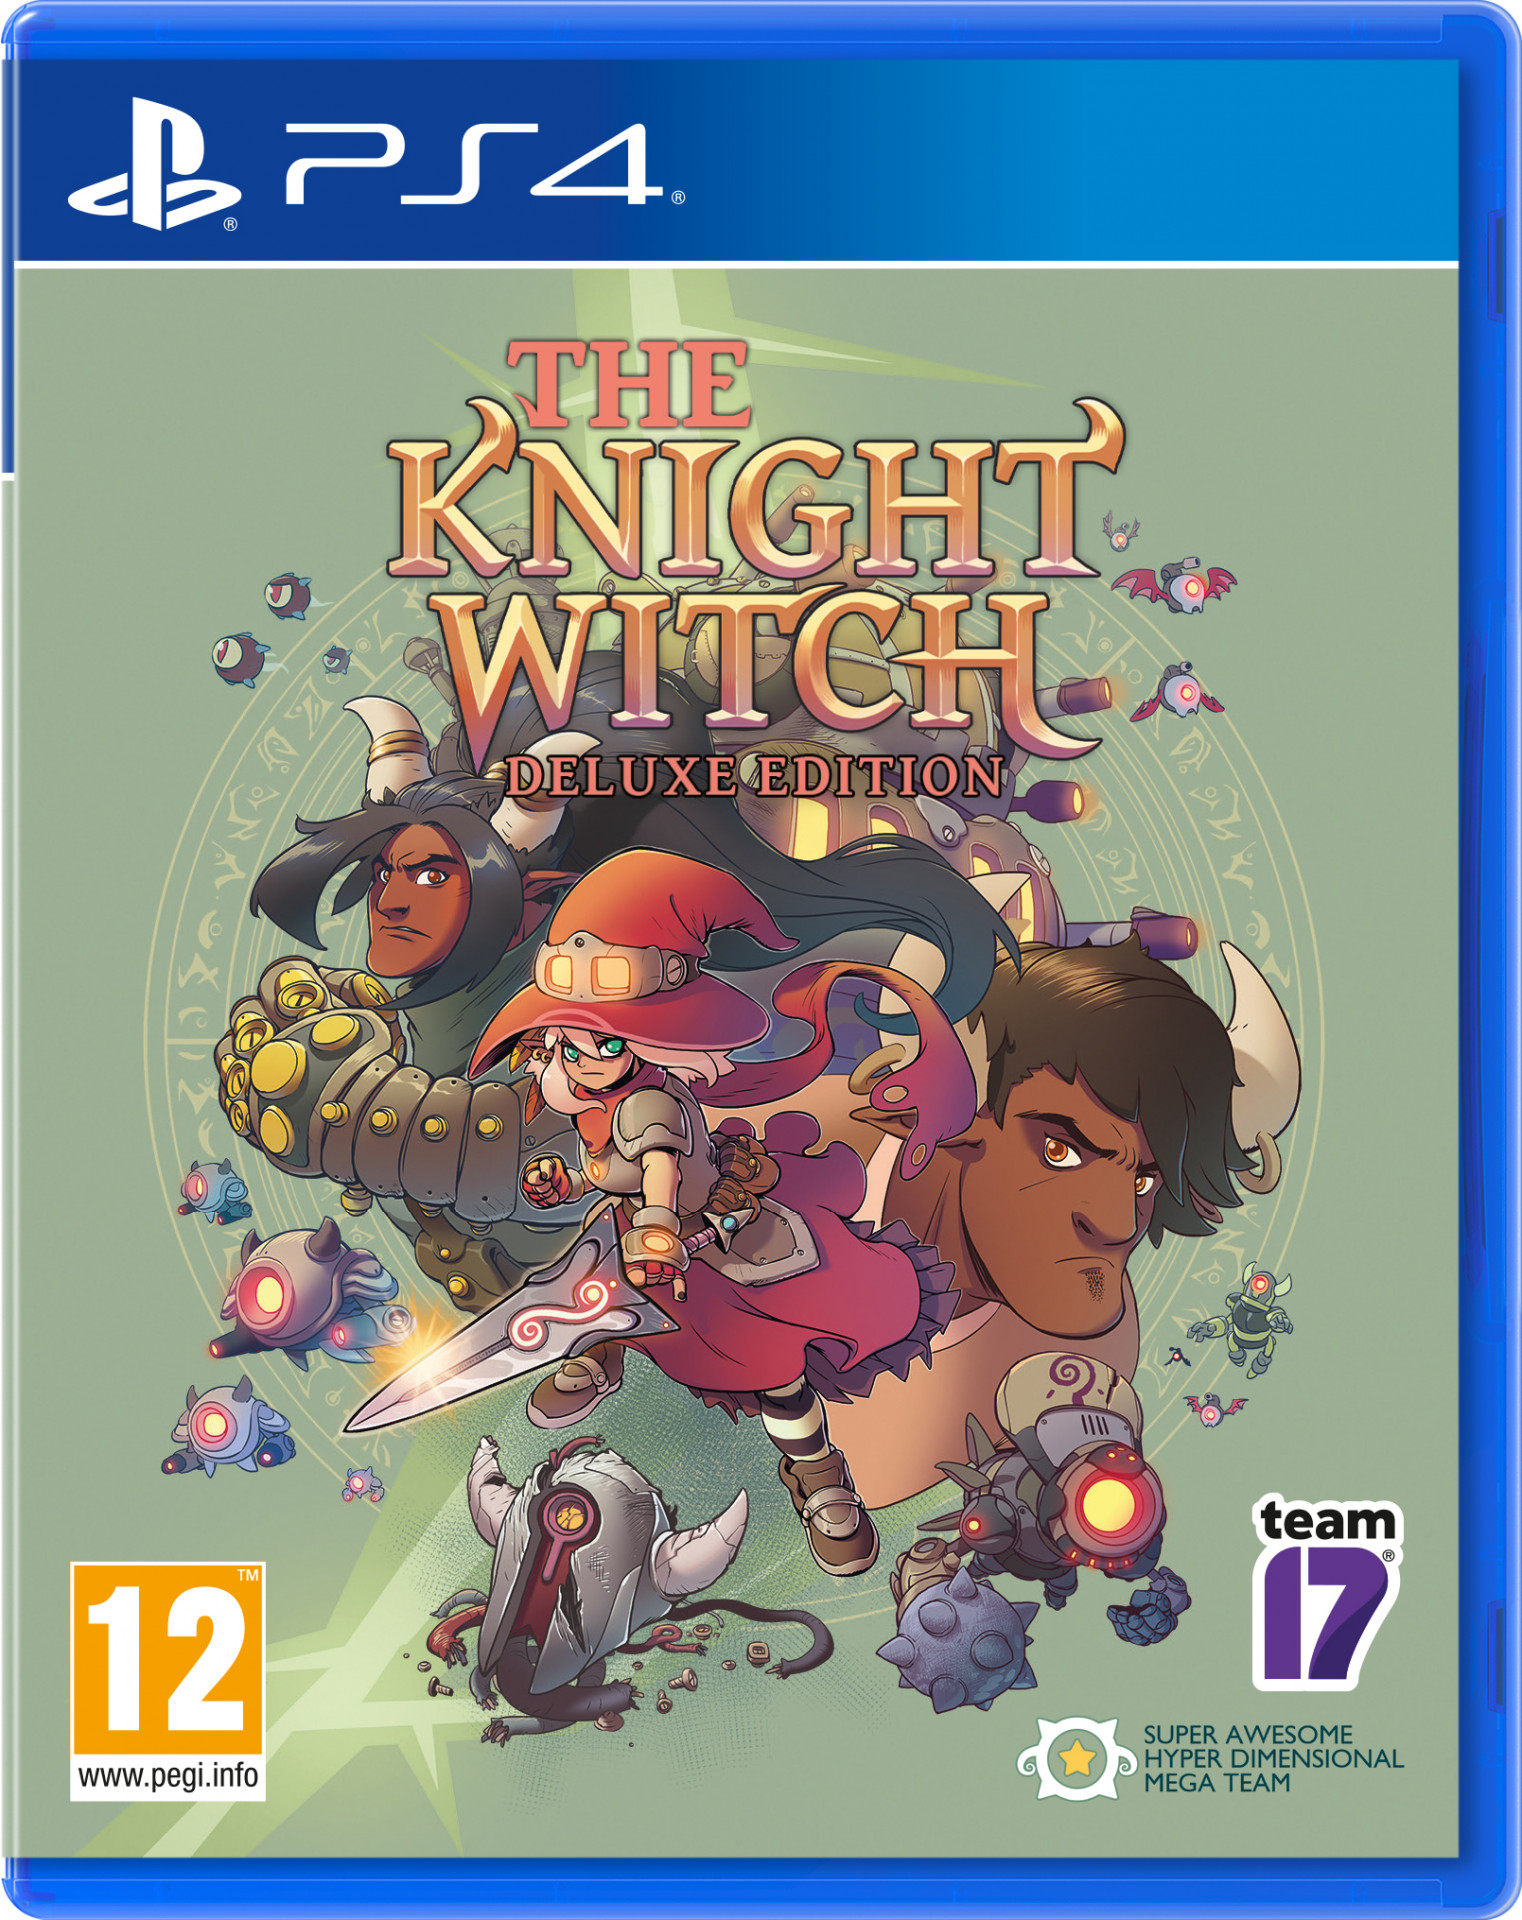 The Knight Witch - Deluxe Edition (PS4), Team 17